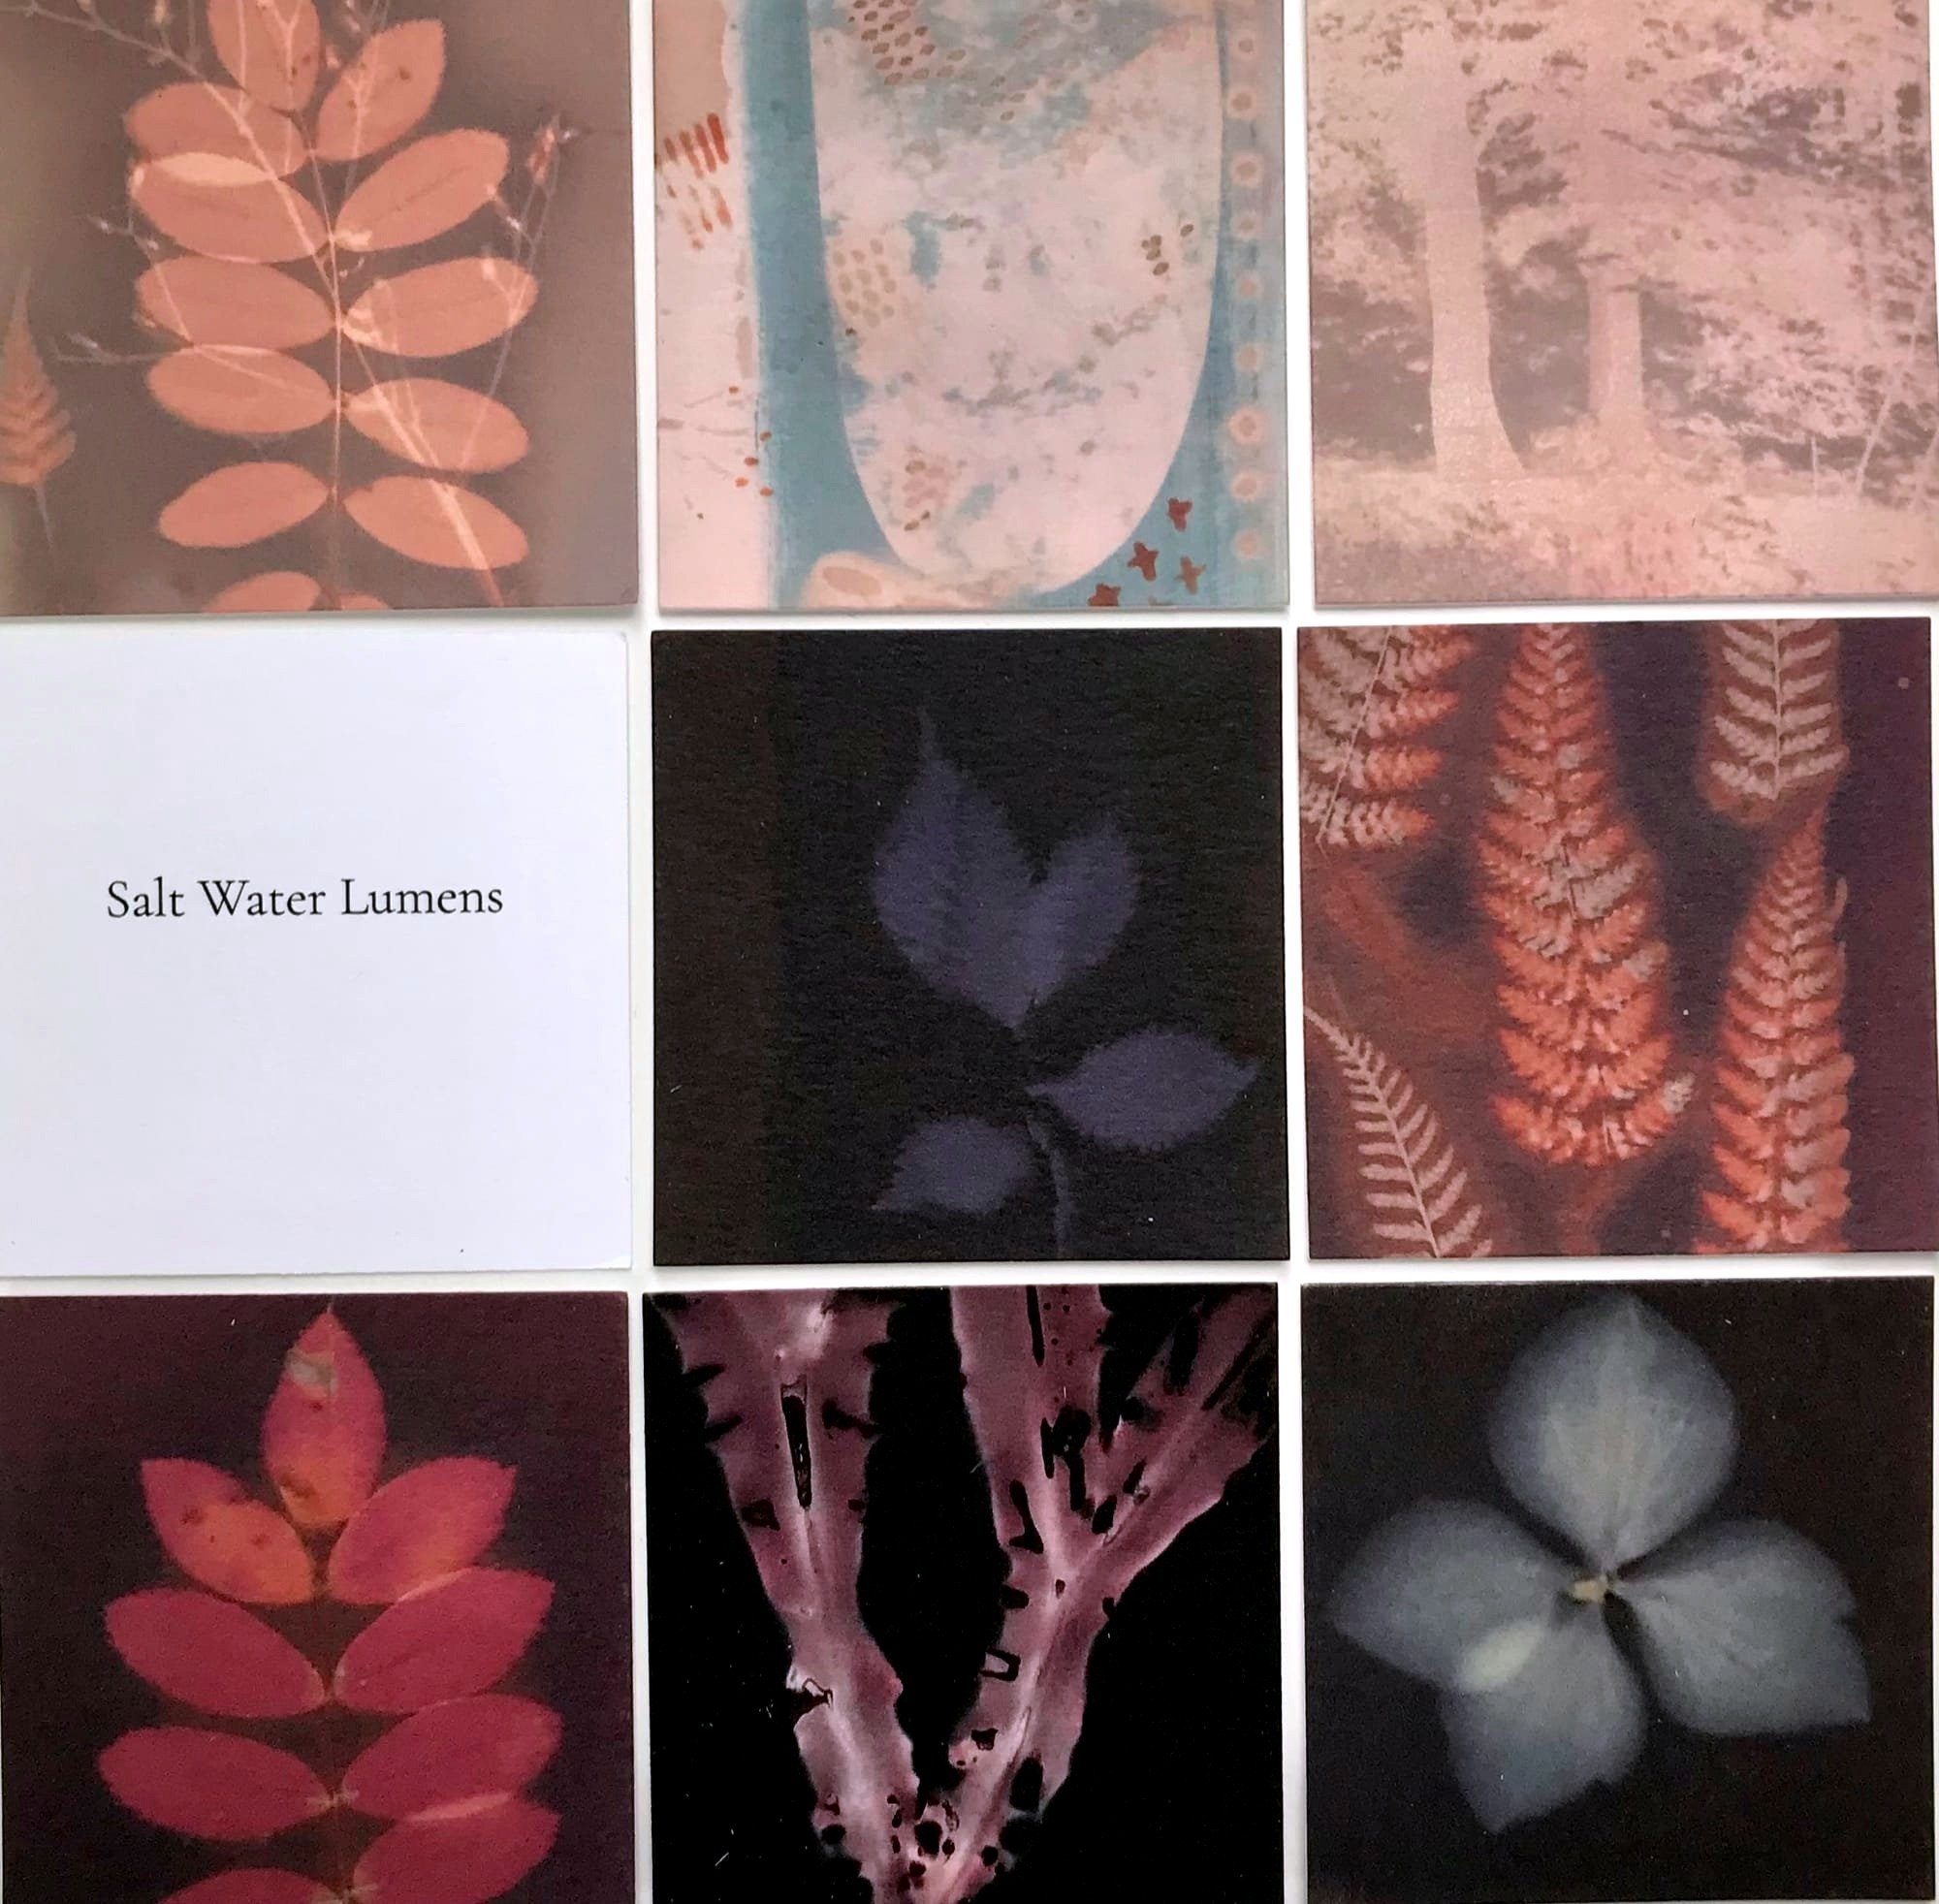 Salt Water Lumens - a collection of specimens